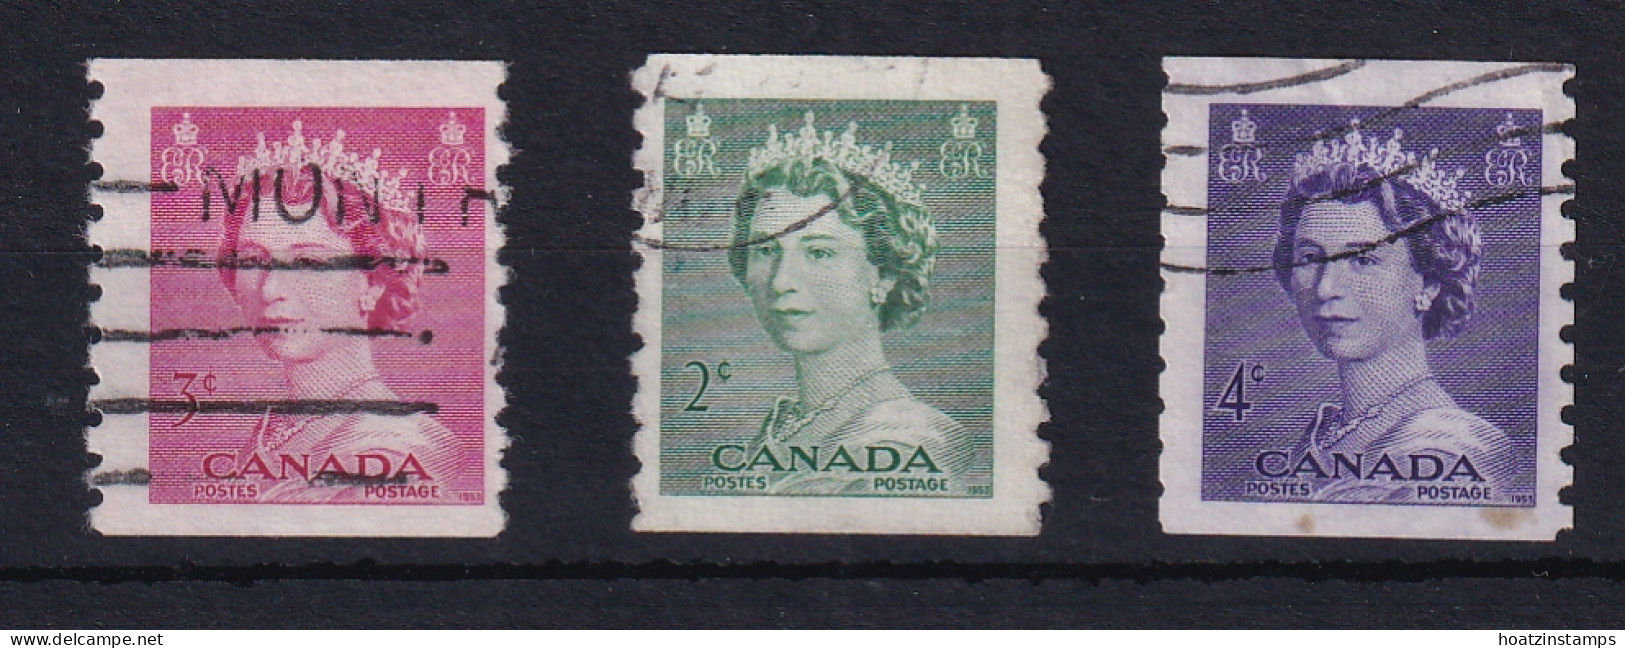 Canada: 1953   QE II - Coil Stamps Set   SG455-457  [Imperf X 9½]   Used - Gebruikt